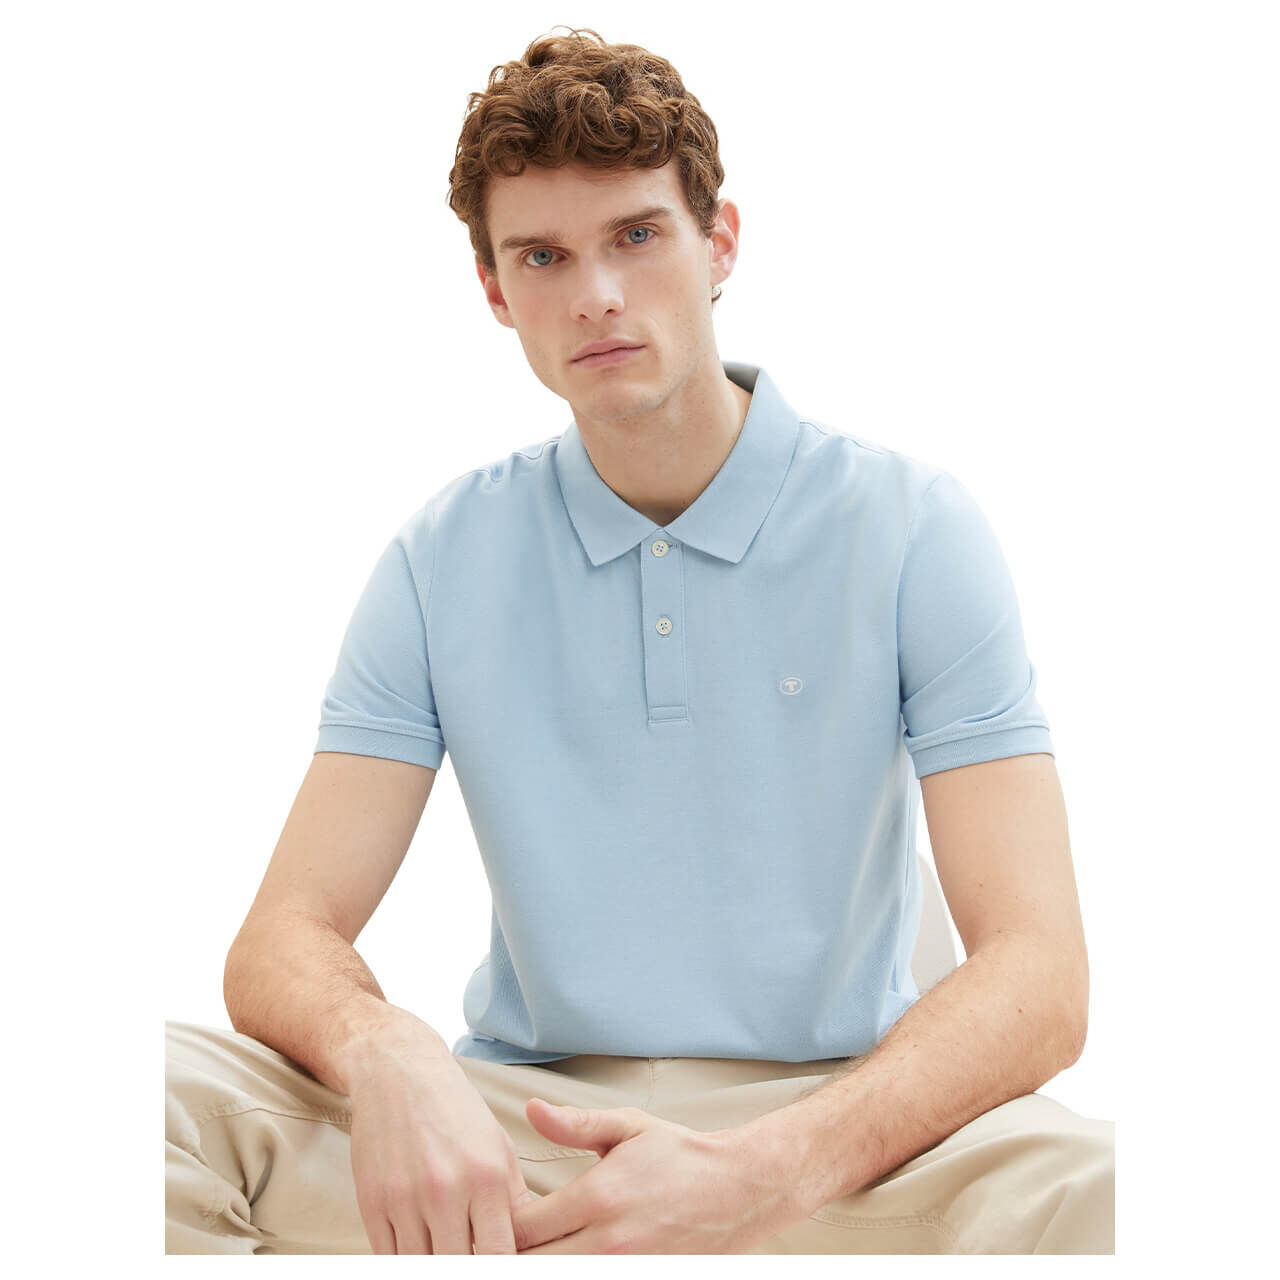 Tom Tailor Herren Piqué Poloshirt contrast washed out blue